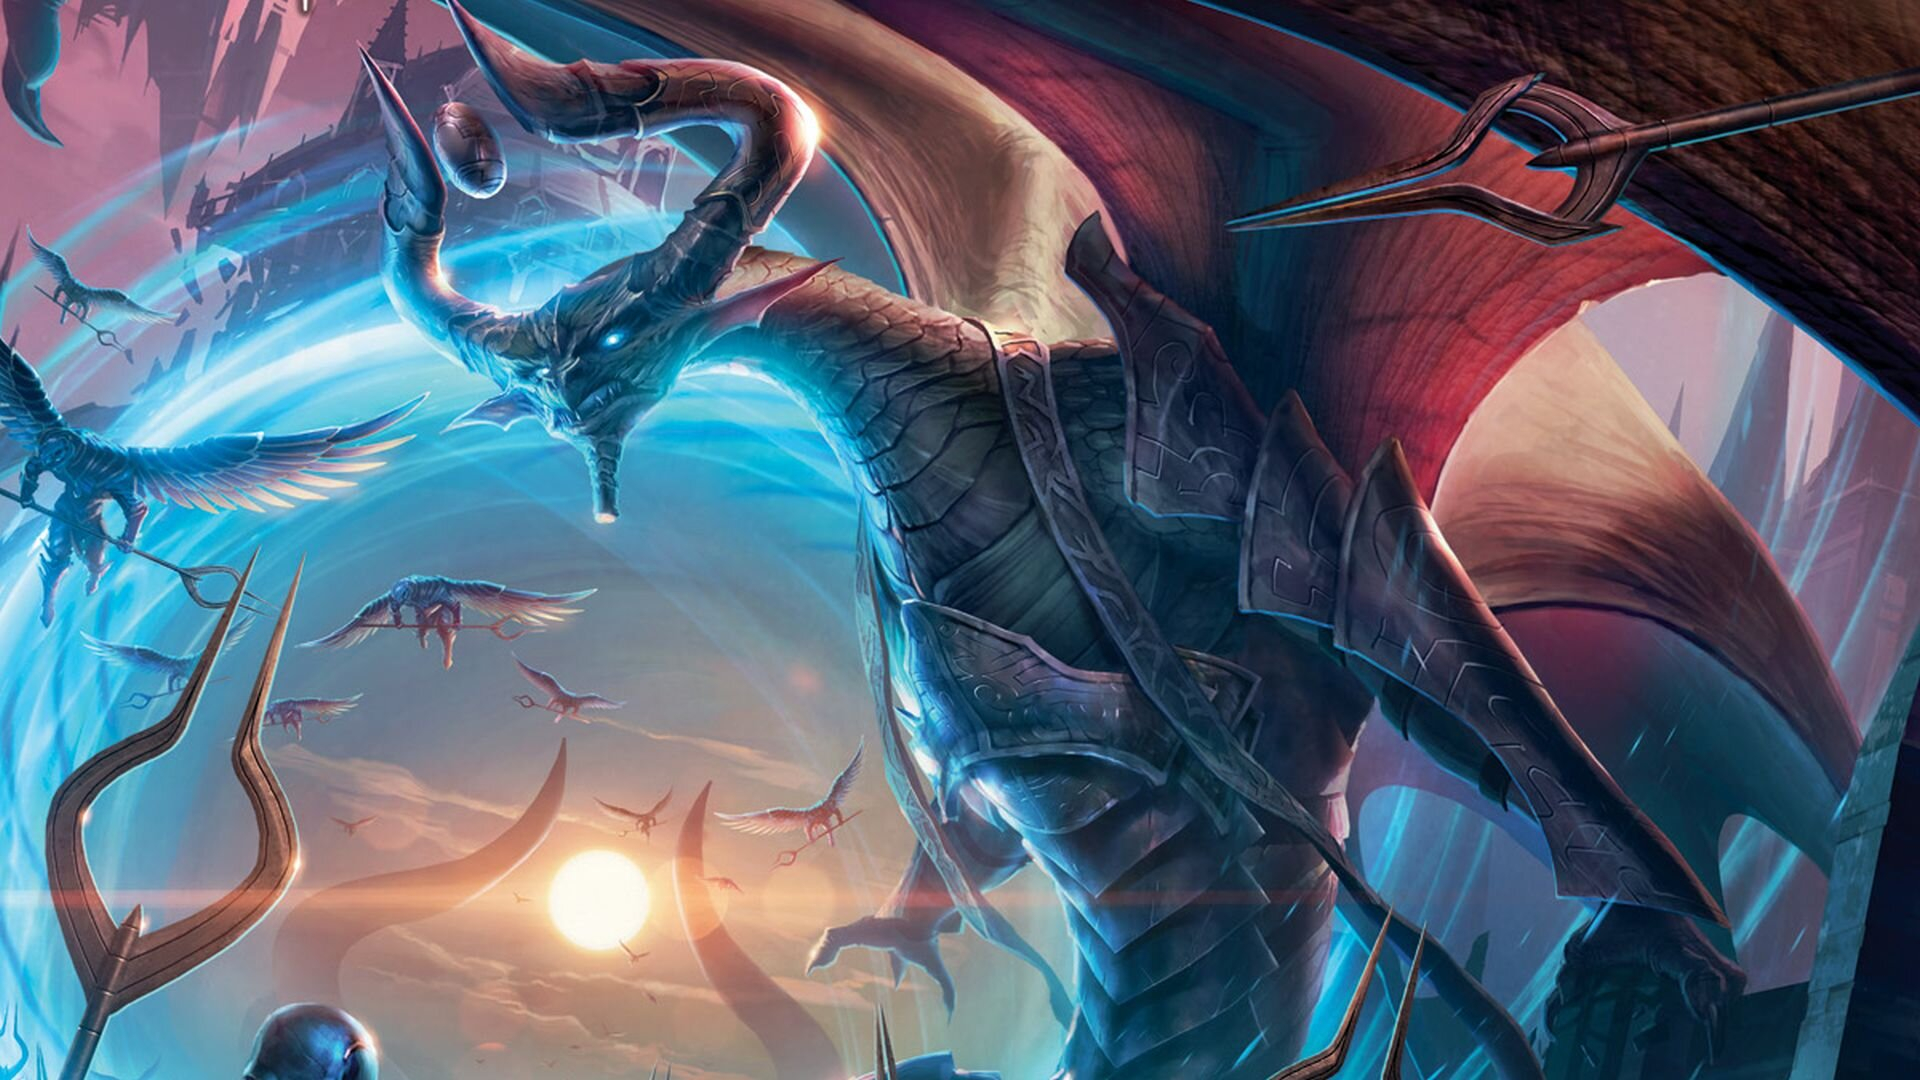 1920x1080 Review: THE ART OF MAGIC: THE GATHERING WAR OF THE SPARK Is Gorgeous and Introduces Fans to the Lore of the Popular Game &acirc;&#128;&#148; GeekTyrant